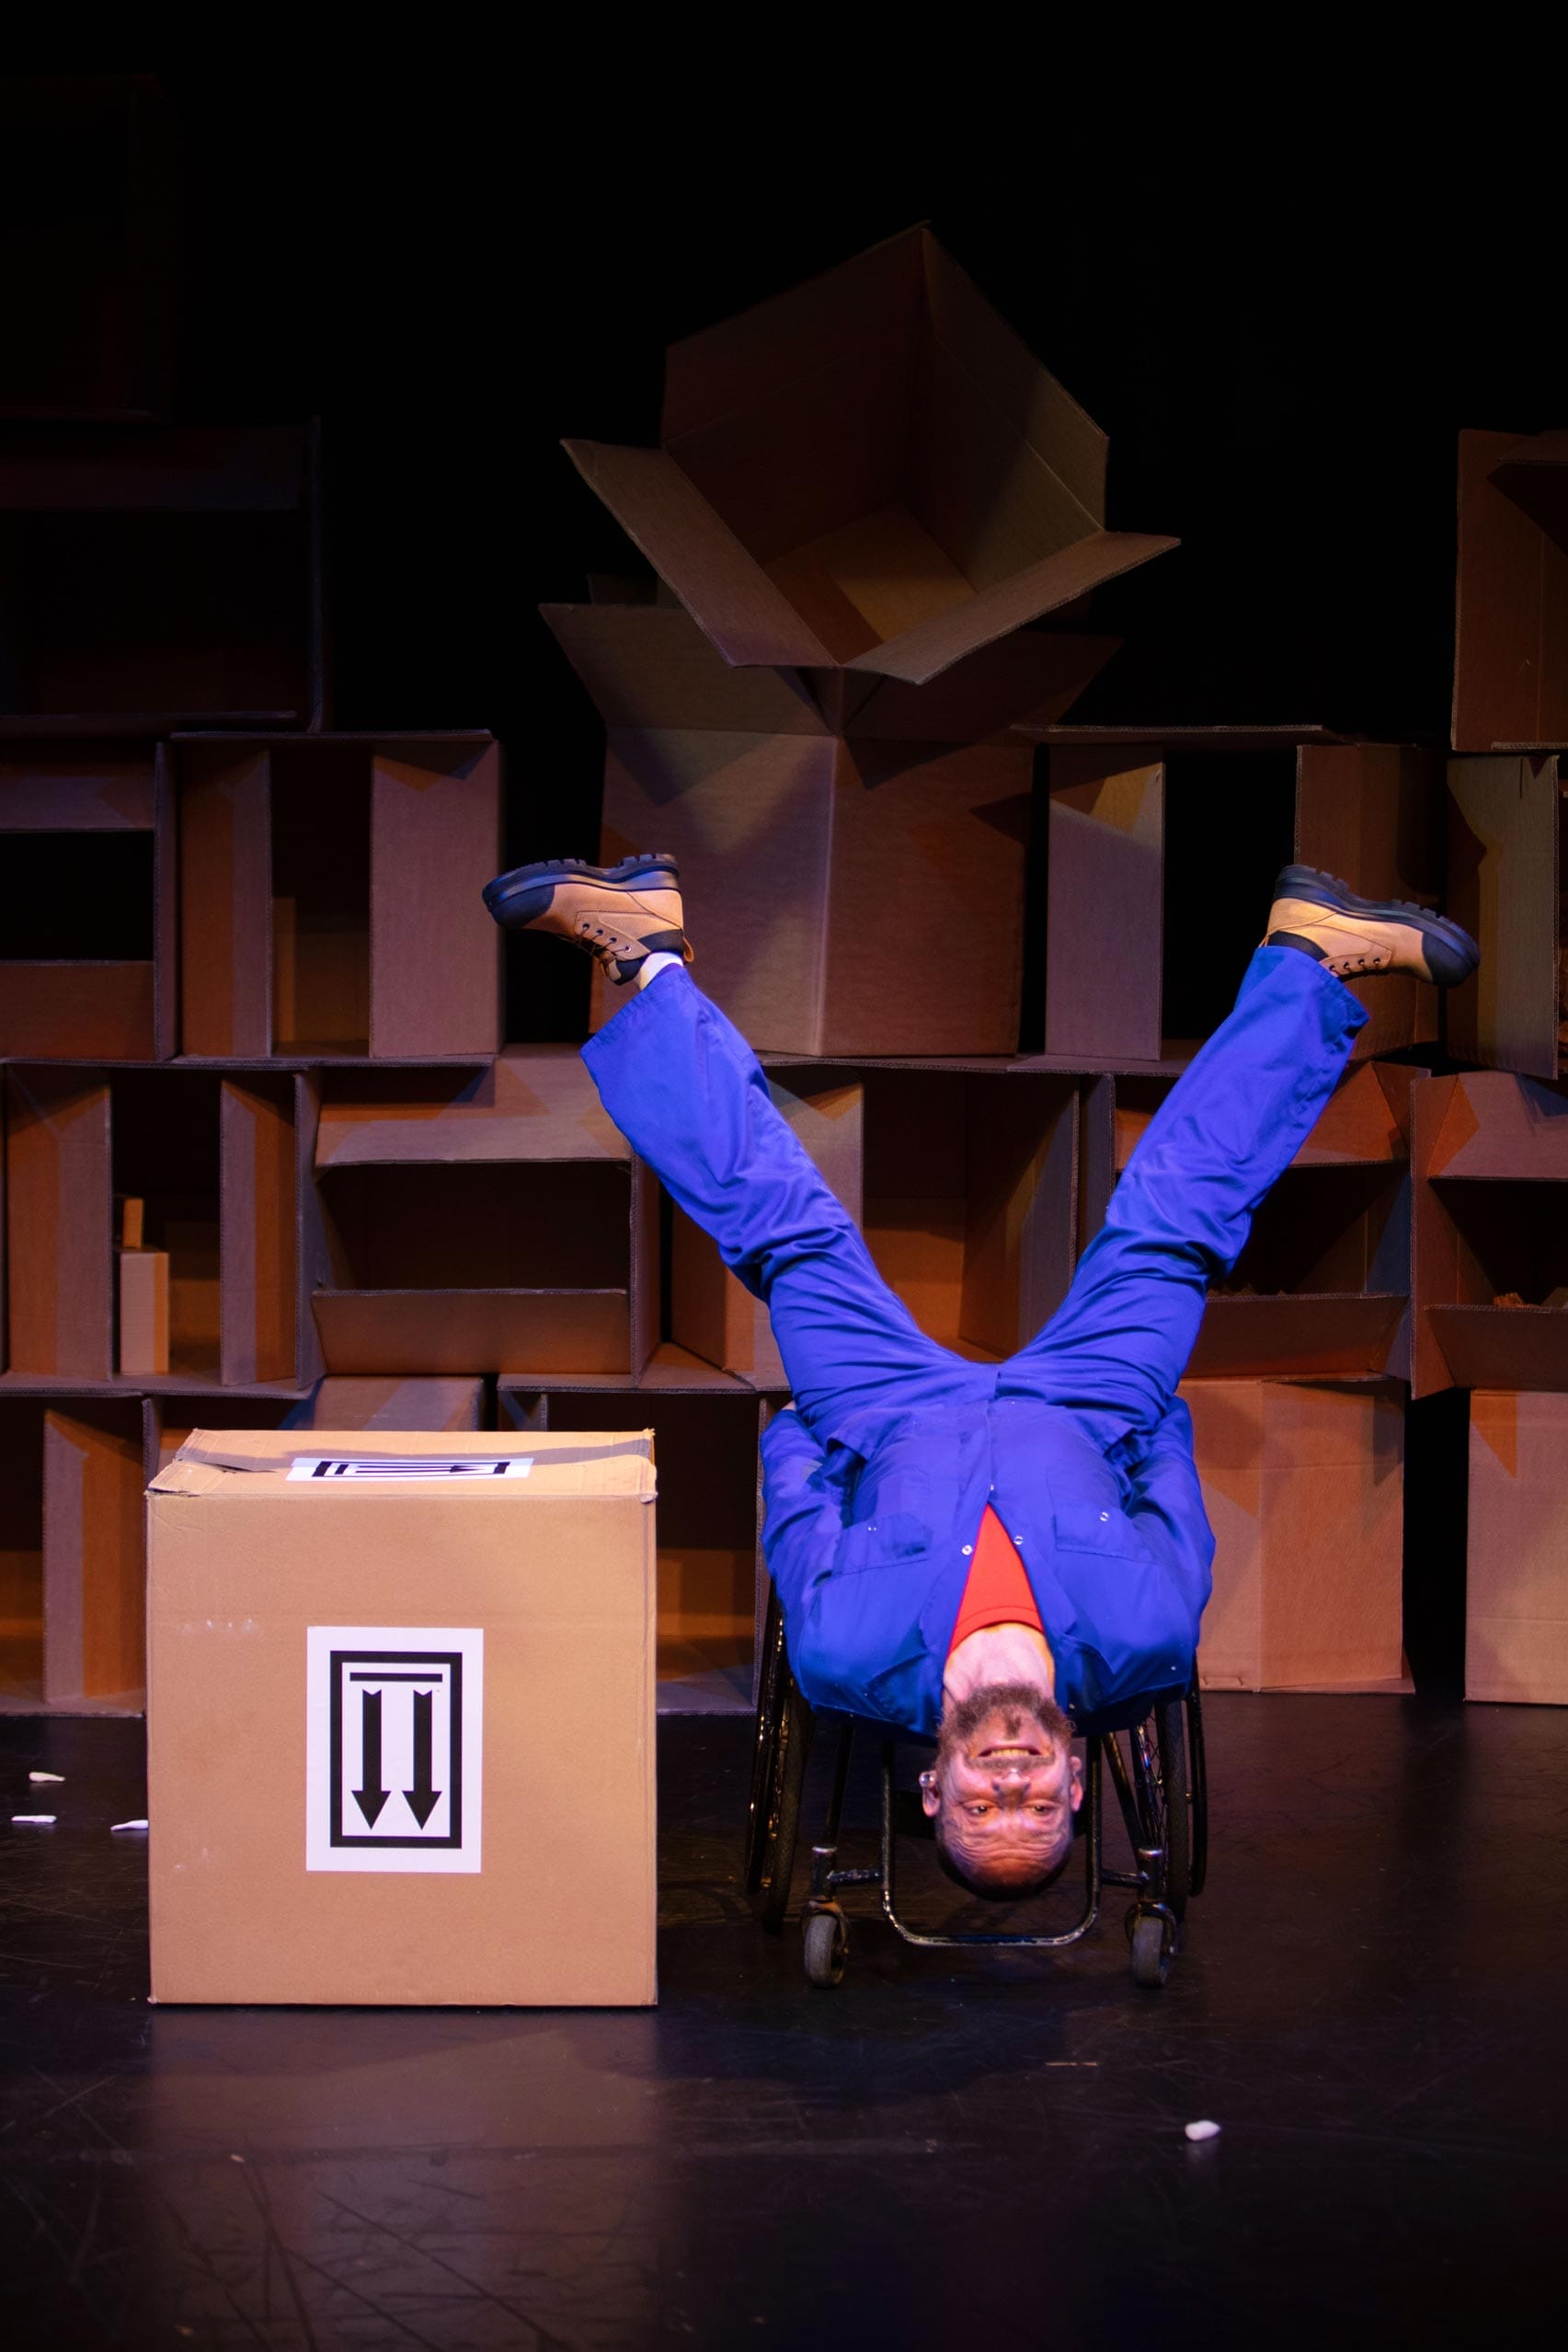 Daryl, a white man with a beard in light blue overalls sits upside down in his wheelchair with his legs in the air. In the background is a wall of cardboard boxes